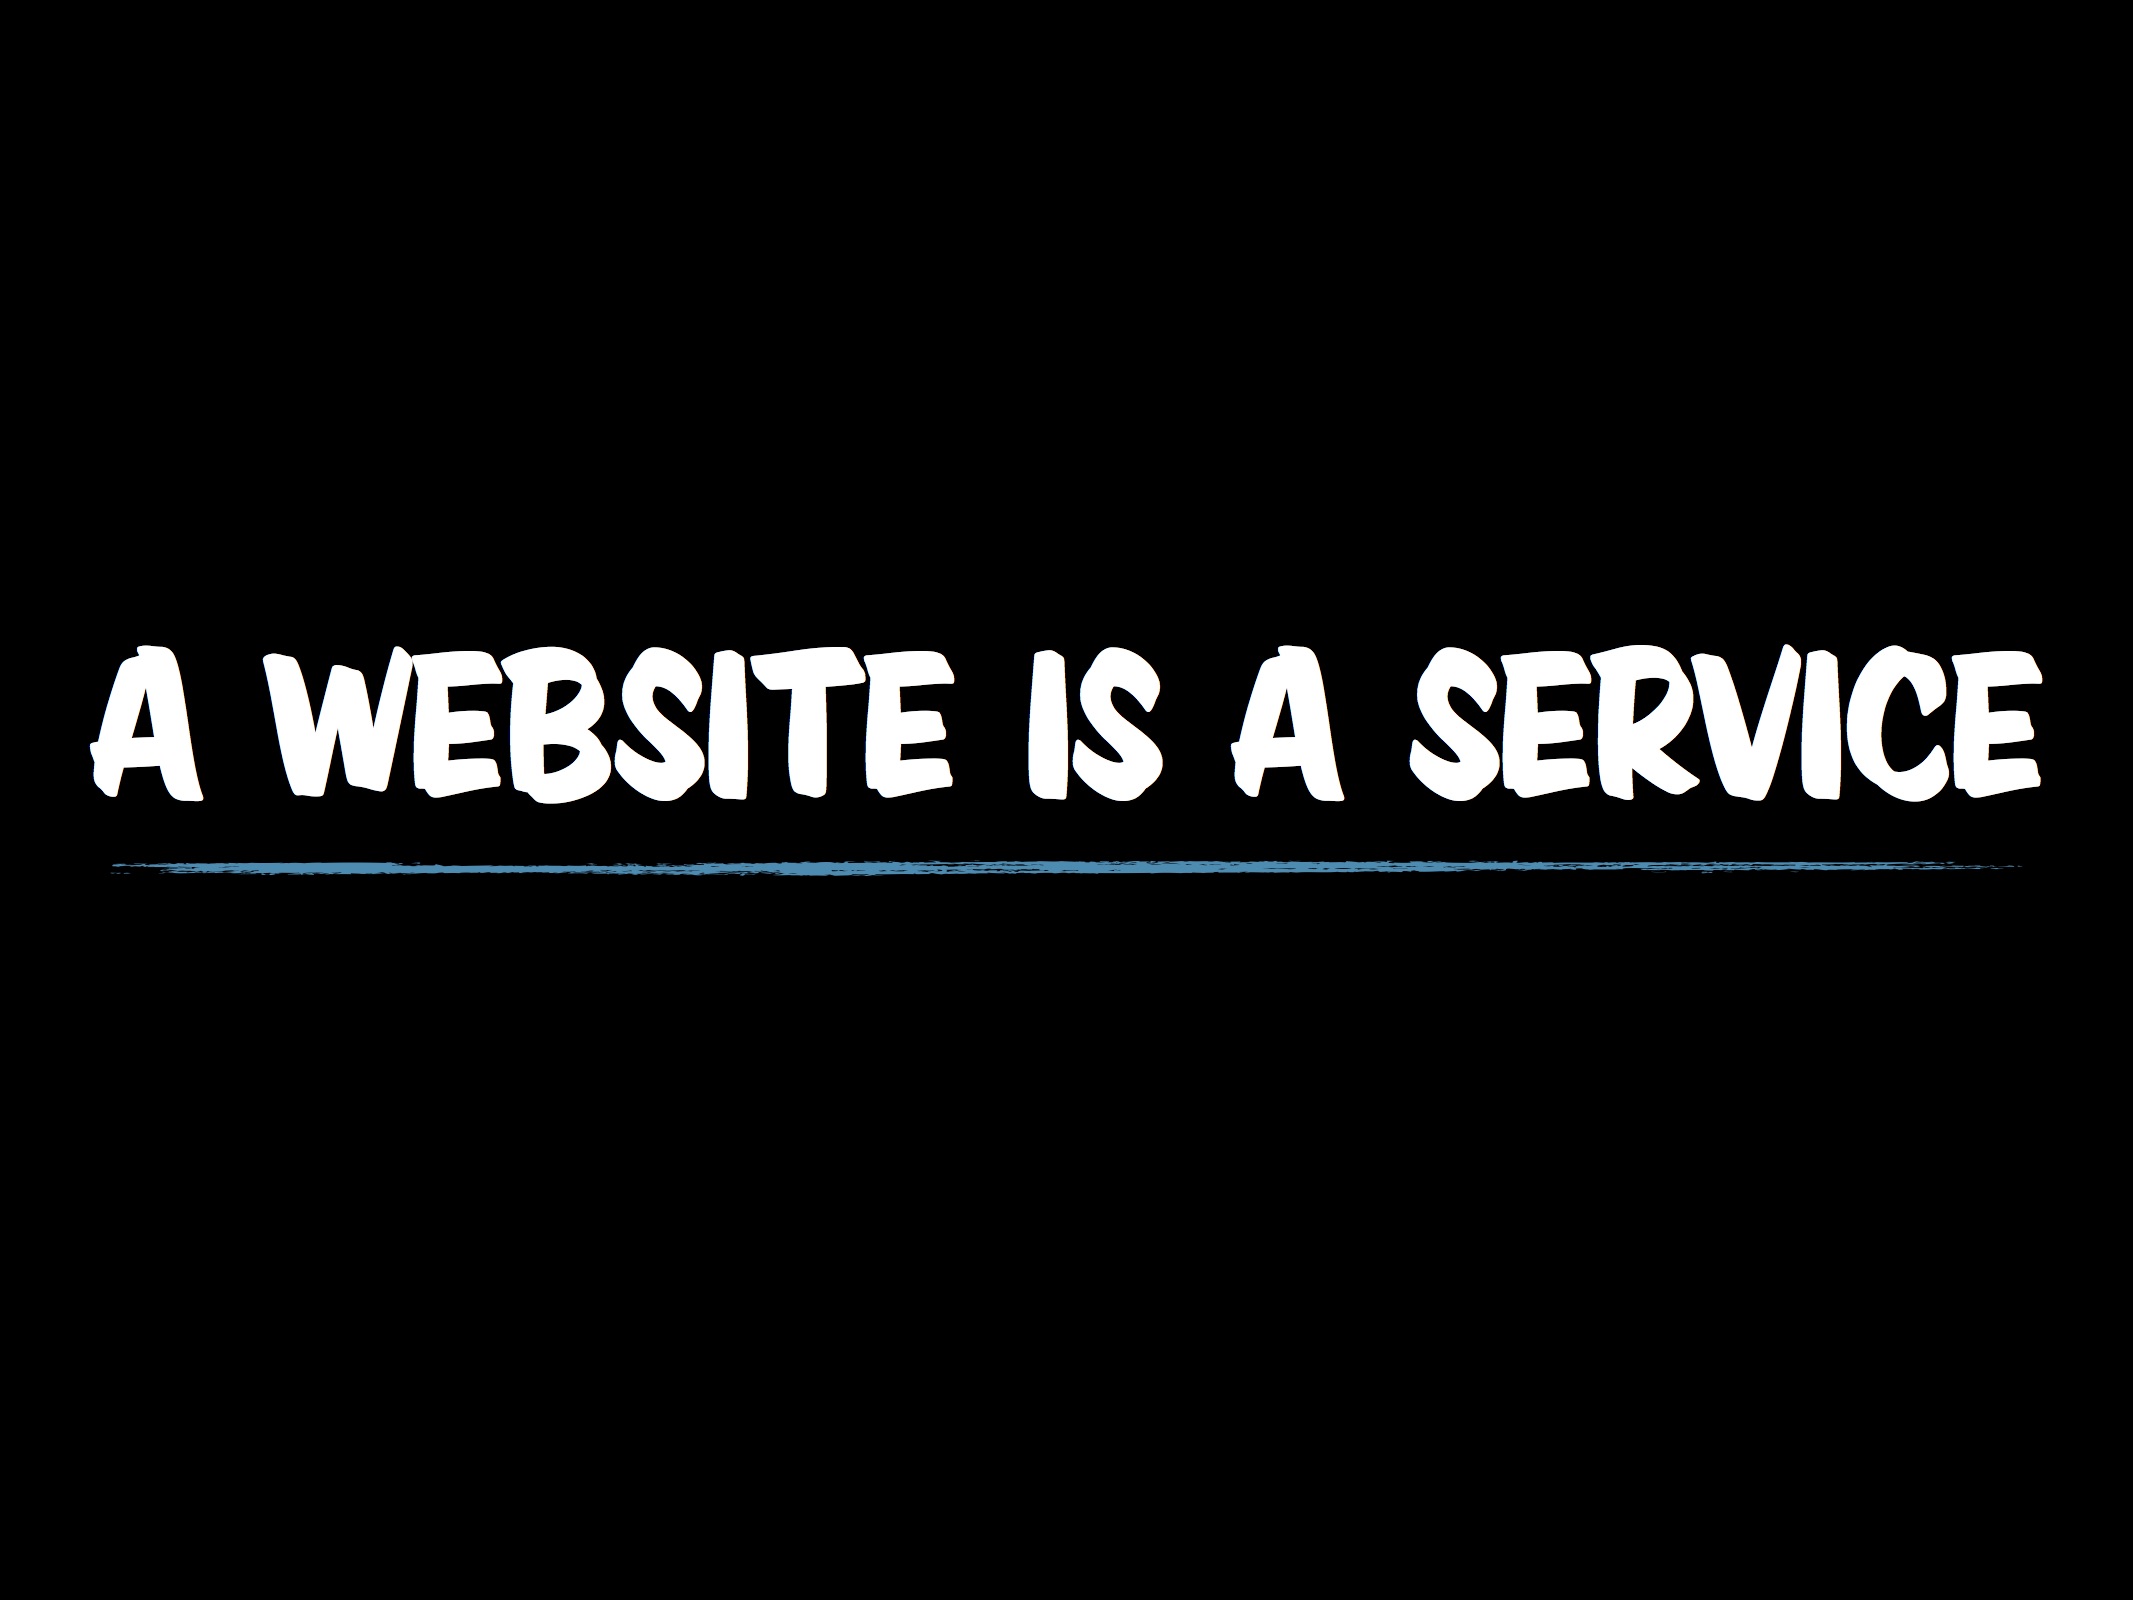 A website is a service